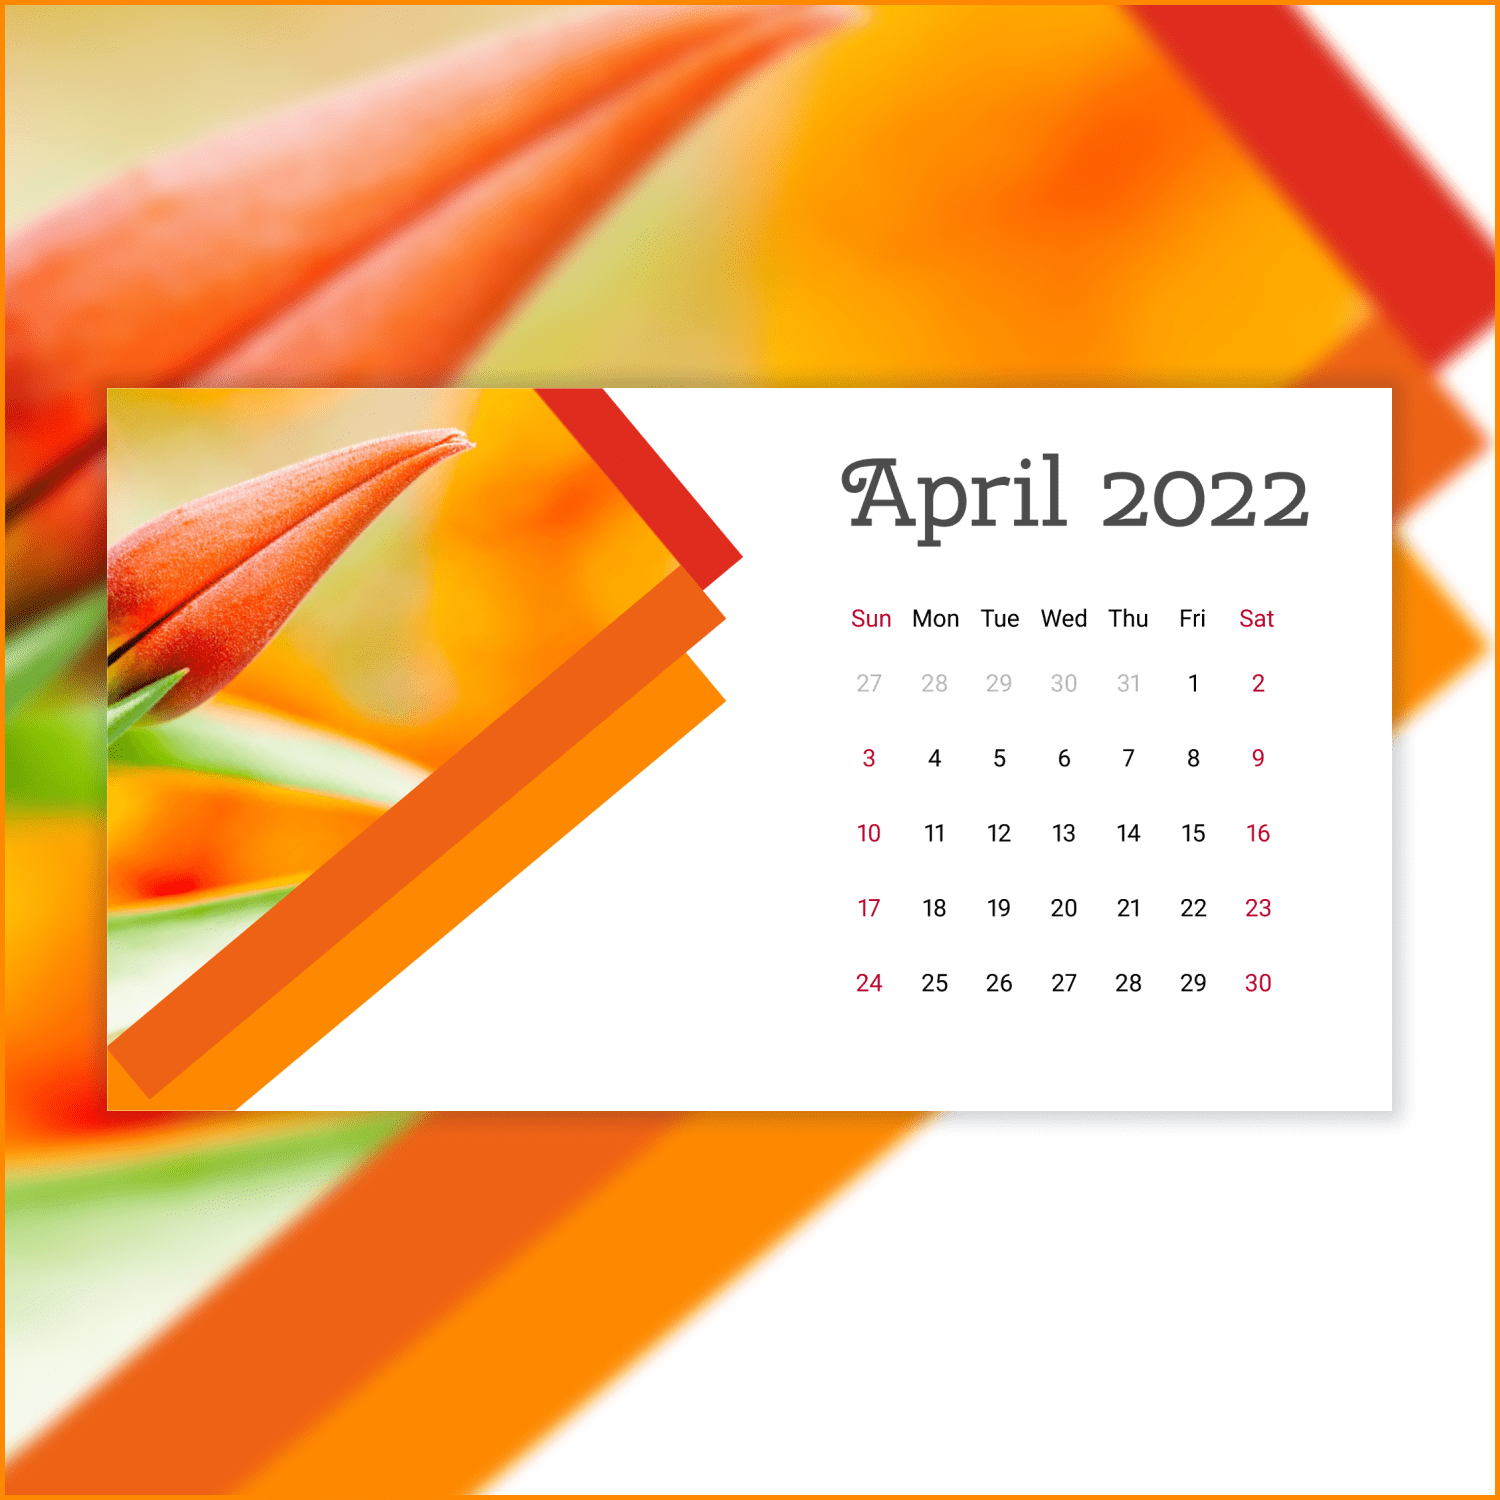 Free Printable Orange Calendar with a Flower for April 2022 cover.